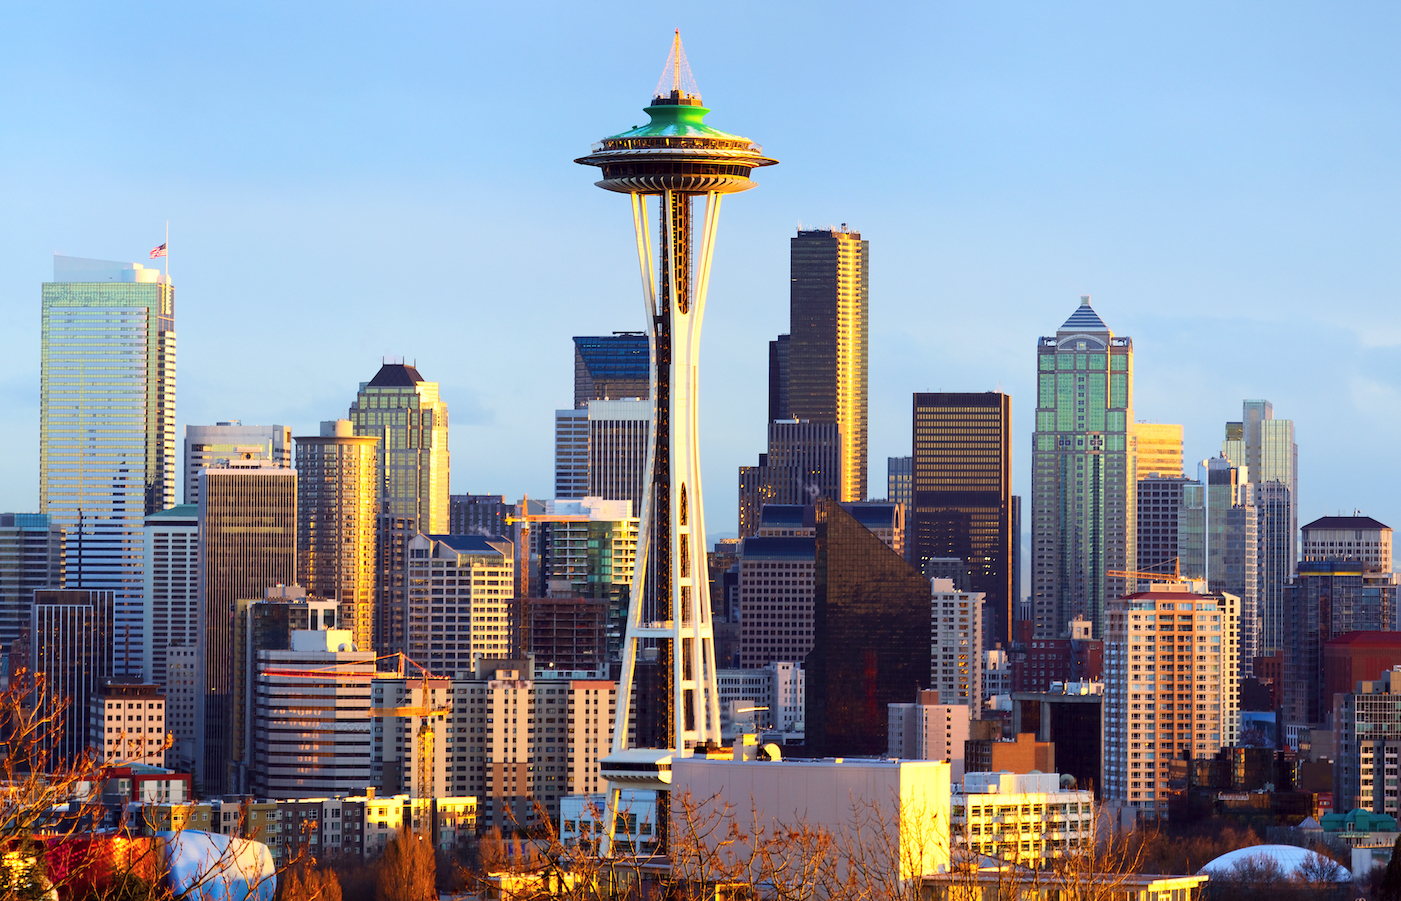 A photo of the Seattle Skyline.